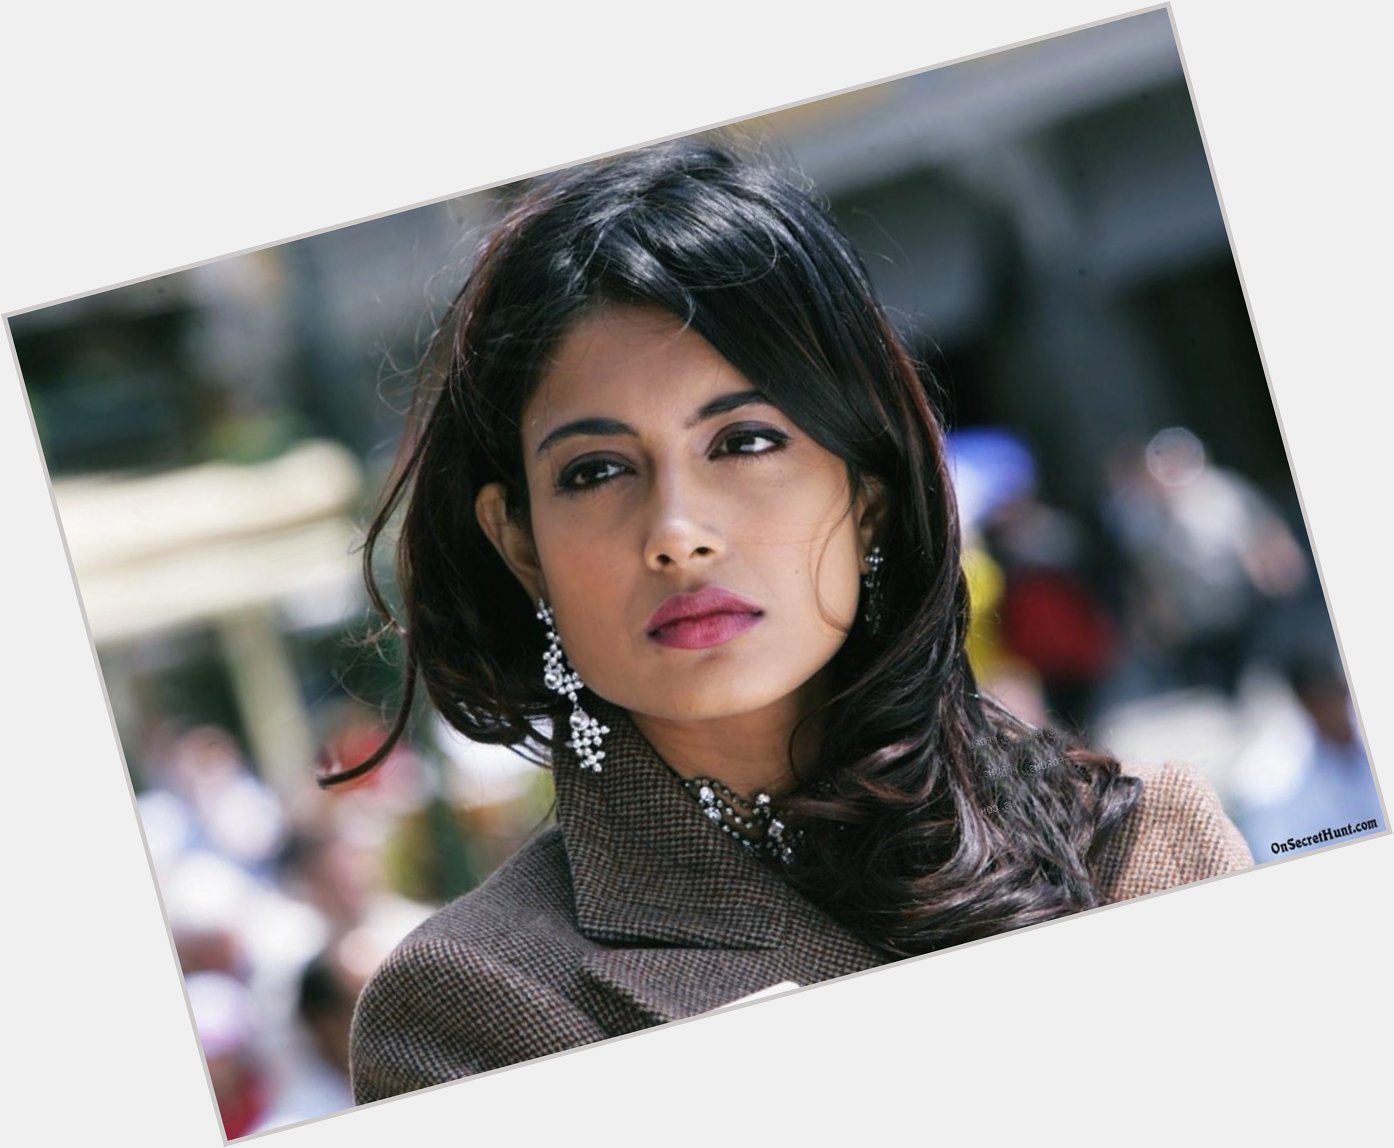 Sarah jane dias     The Hungarian Bollywood group wishes you a happy birthday 